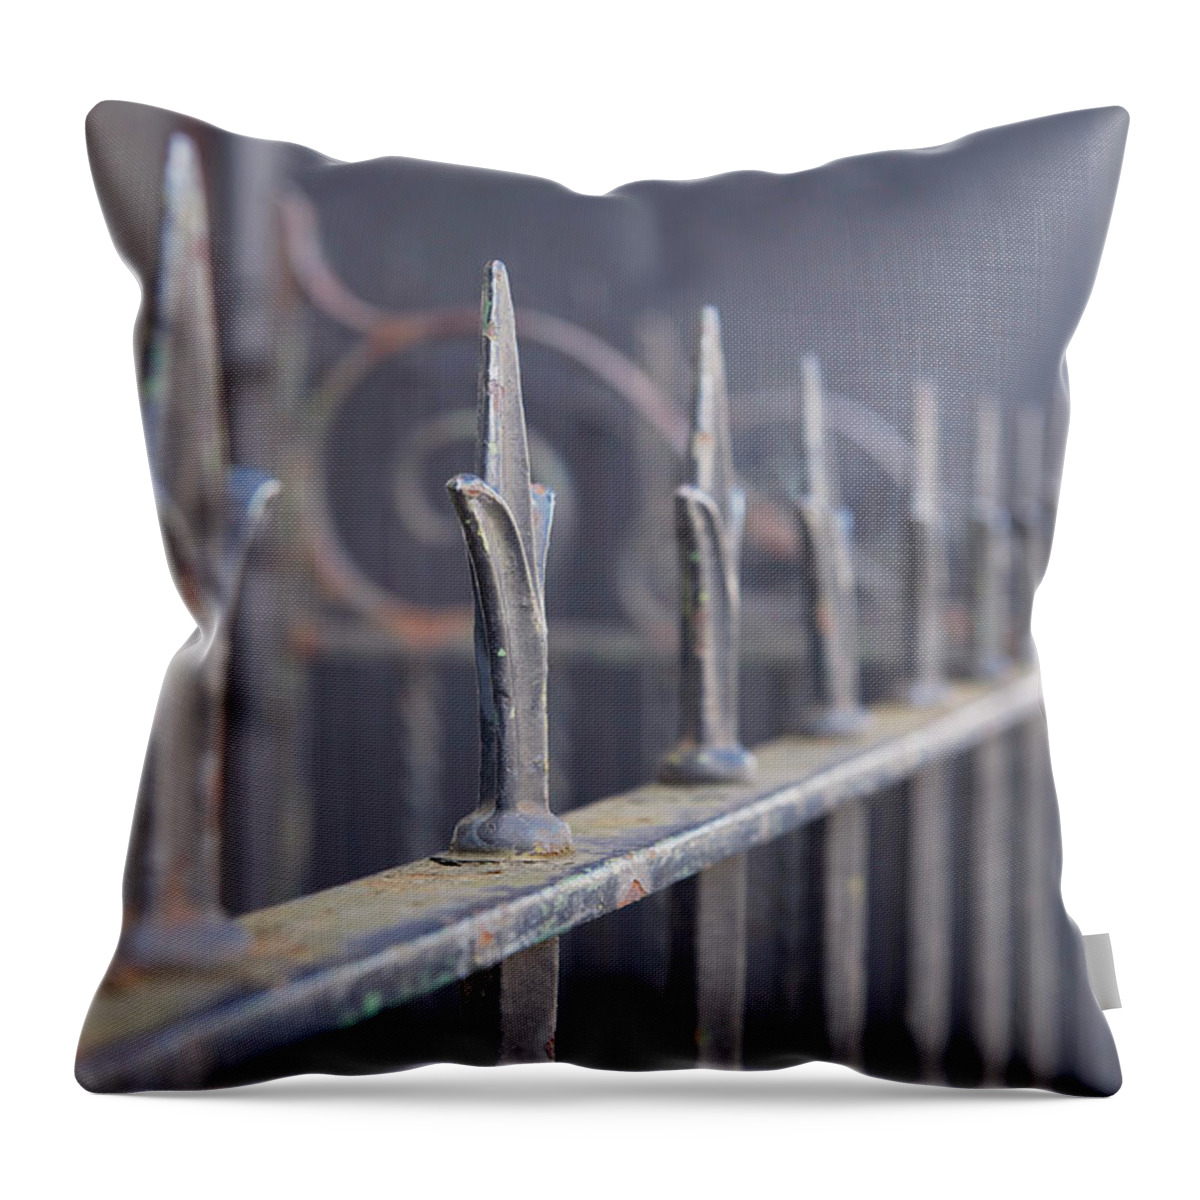 Outdoors Throw Pillow featuring the photograph Old Cast Iron Fence by Sharon Lapkin